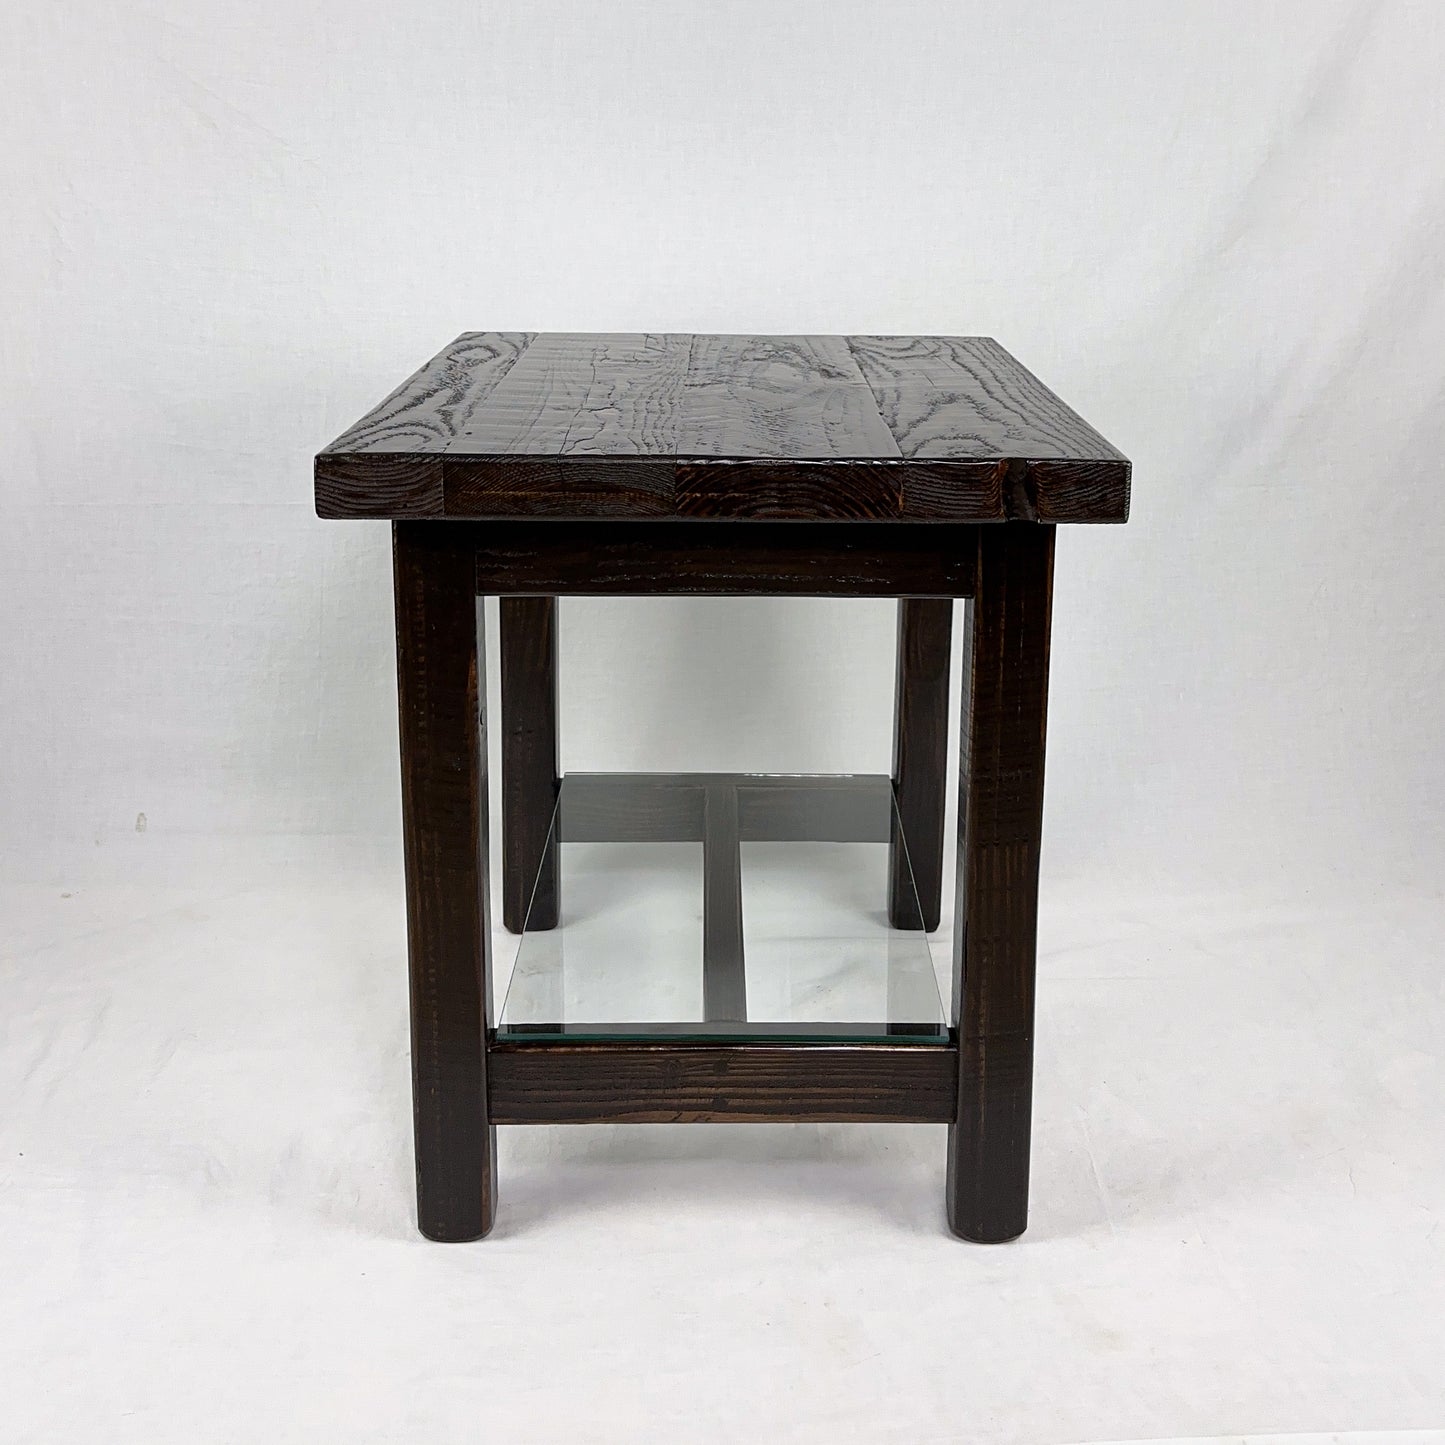 Bitterroot End Table